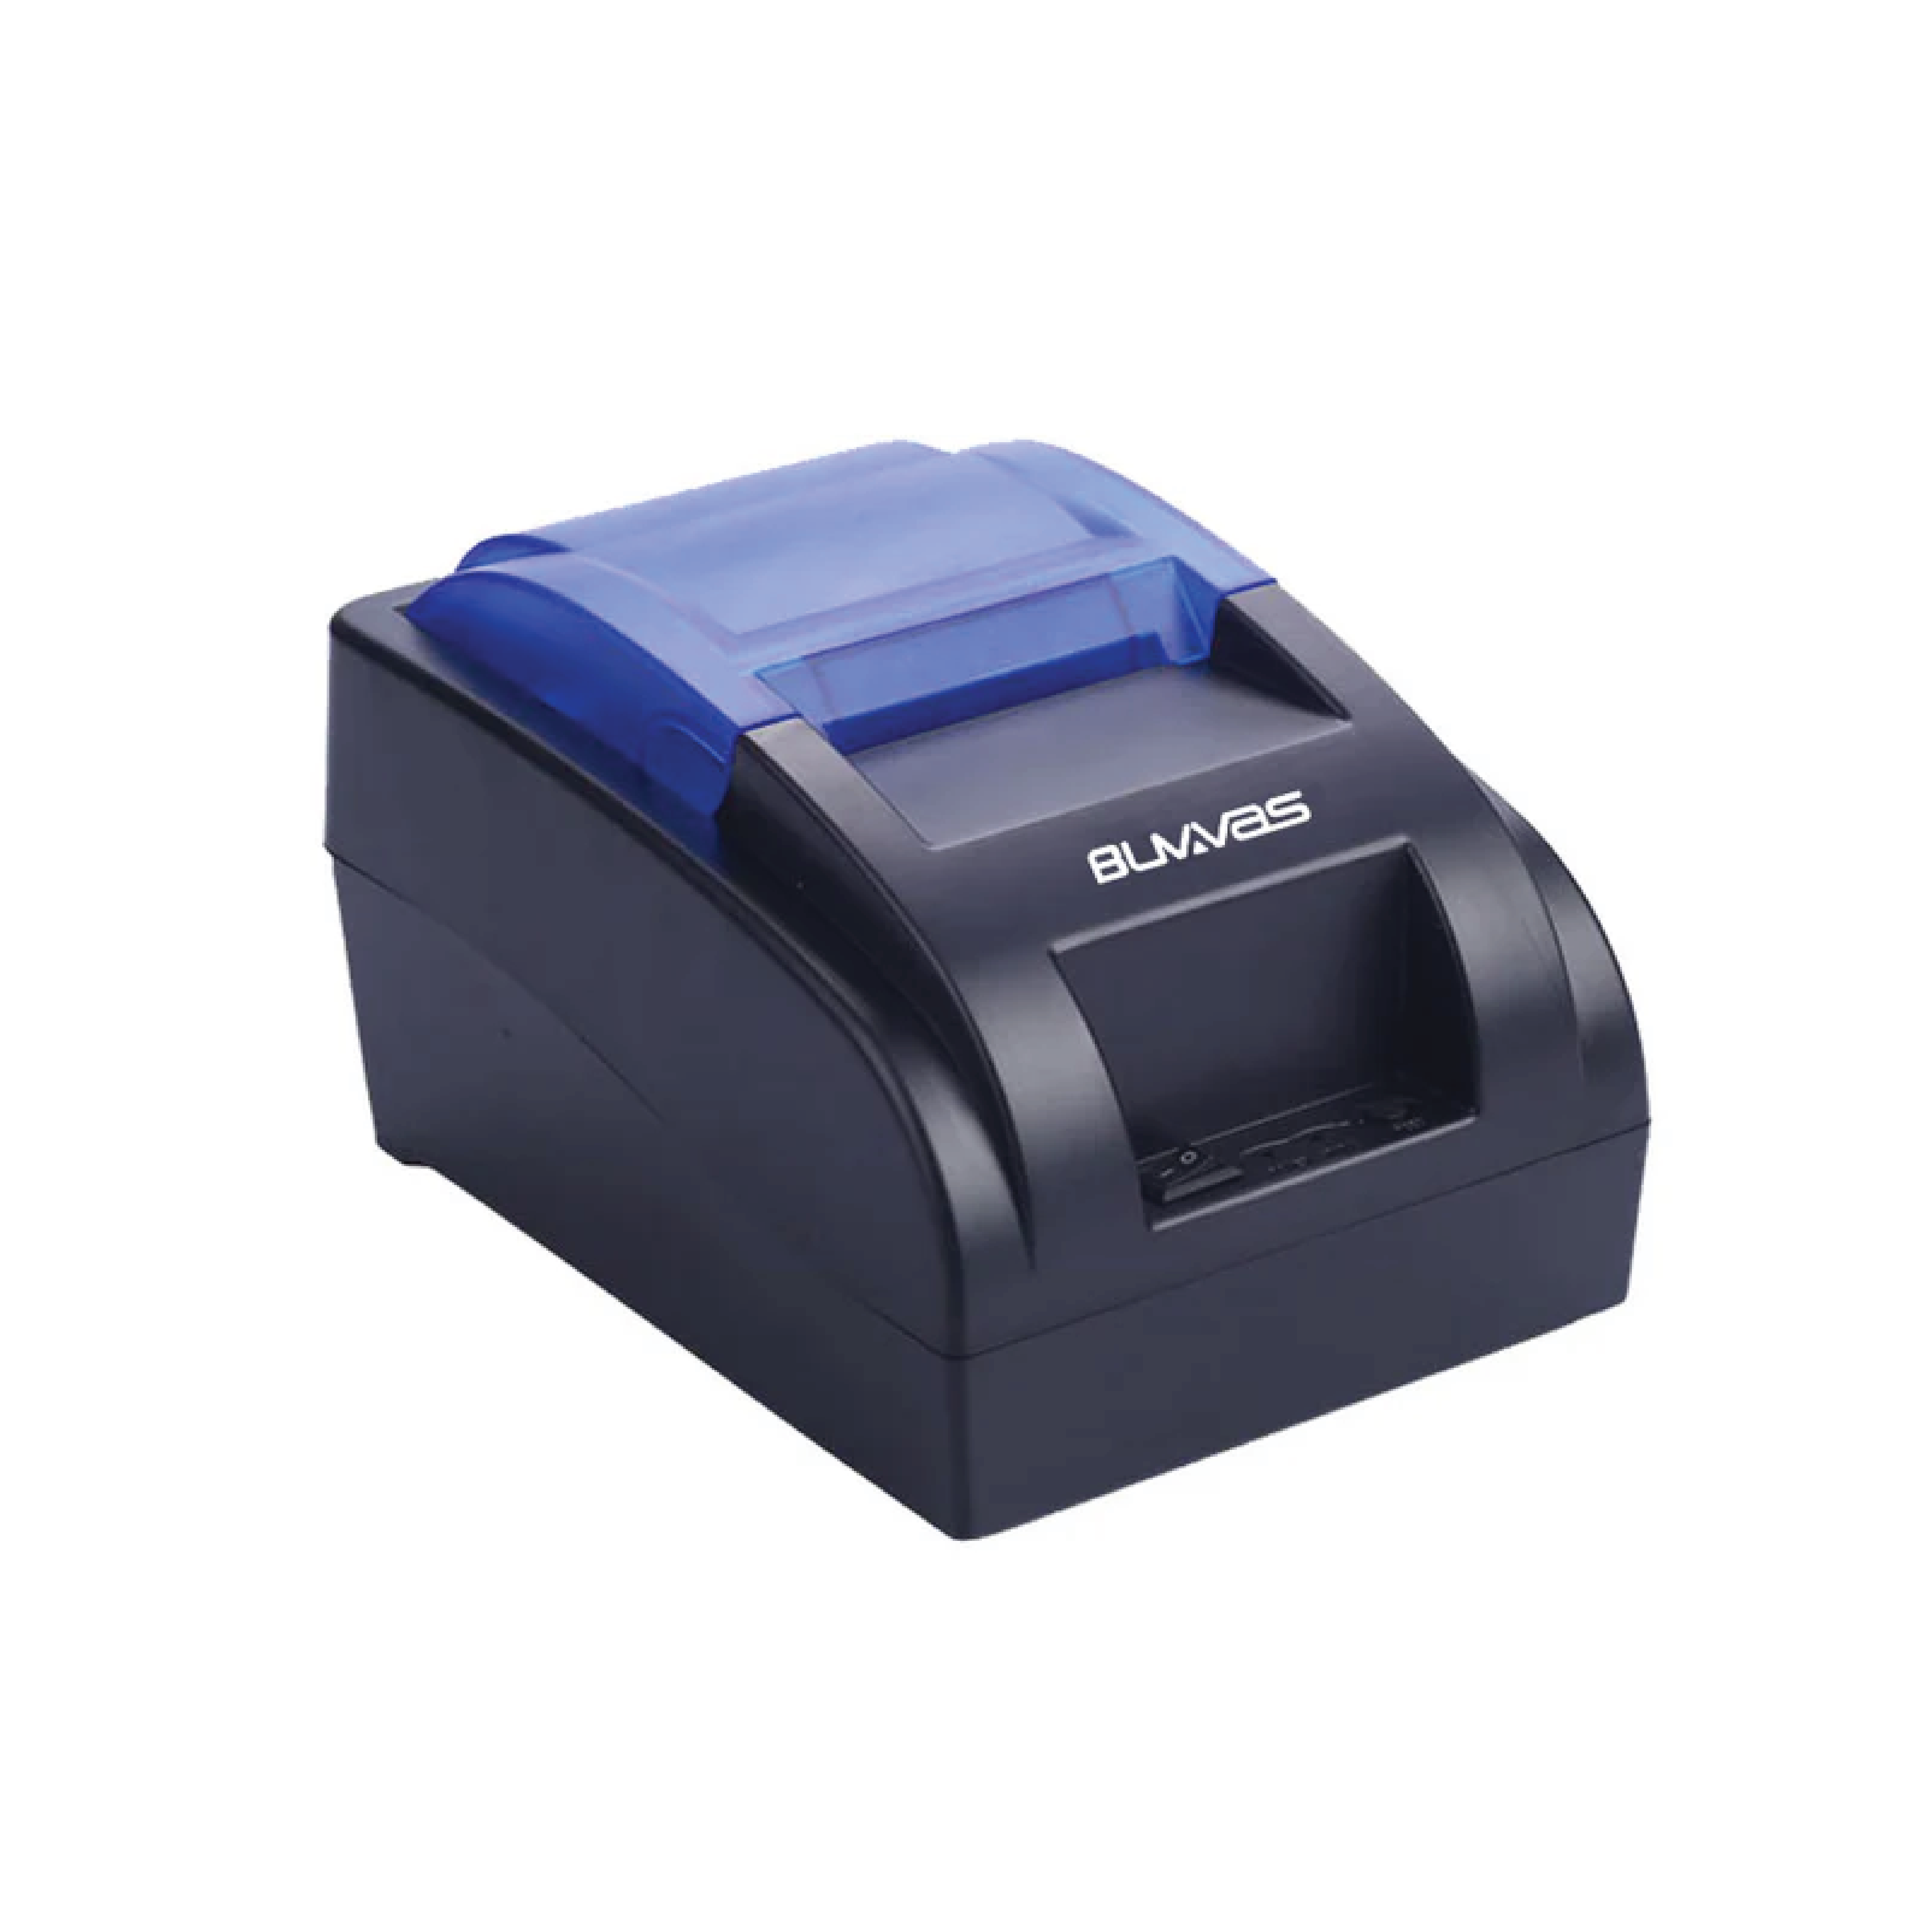 Buvvas HS-58 Thermal Receipt Printer Regular priceRs. 4,999.00 Sale priceRs. 2,500.00Sale Tax included. Interface USB + BLUETOOTH USB Key Specifications Paper Size : 58mm( 2 Inch) Print Speed : 90mm/sec Printer Header Life : 50km Manual Cut Support RJ11 Cashdrawer